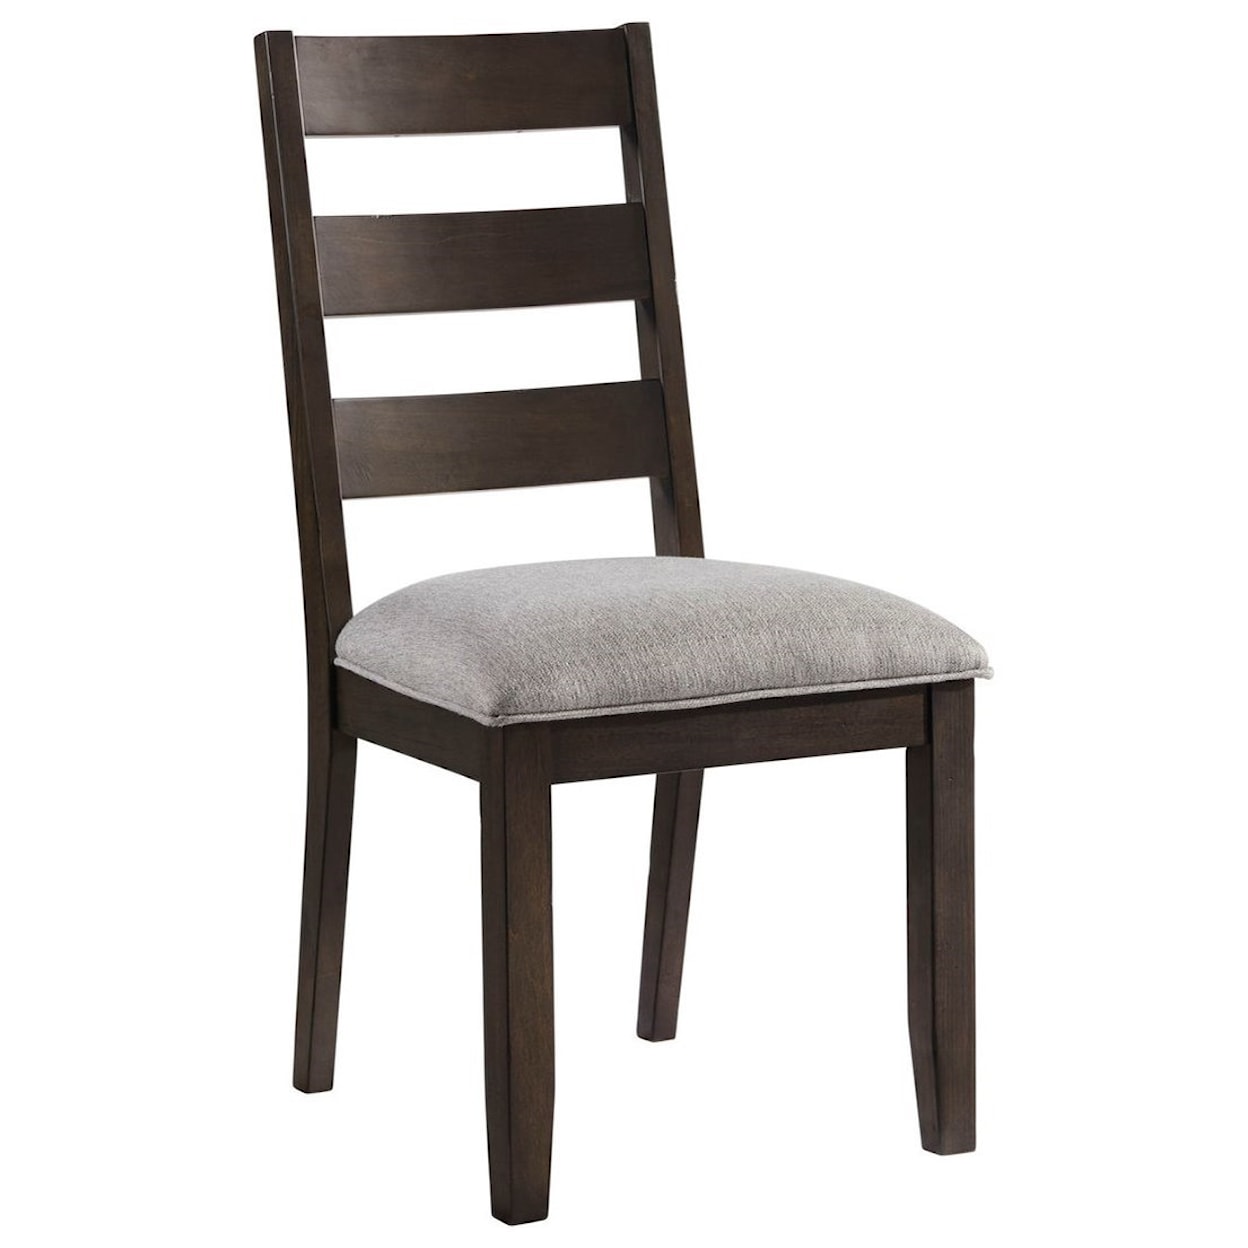 Intercon Beacon 3-Piece Table and Chair Set